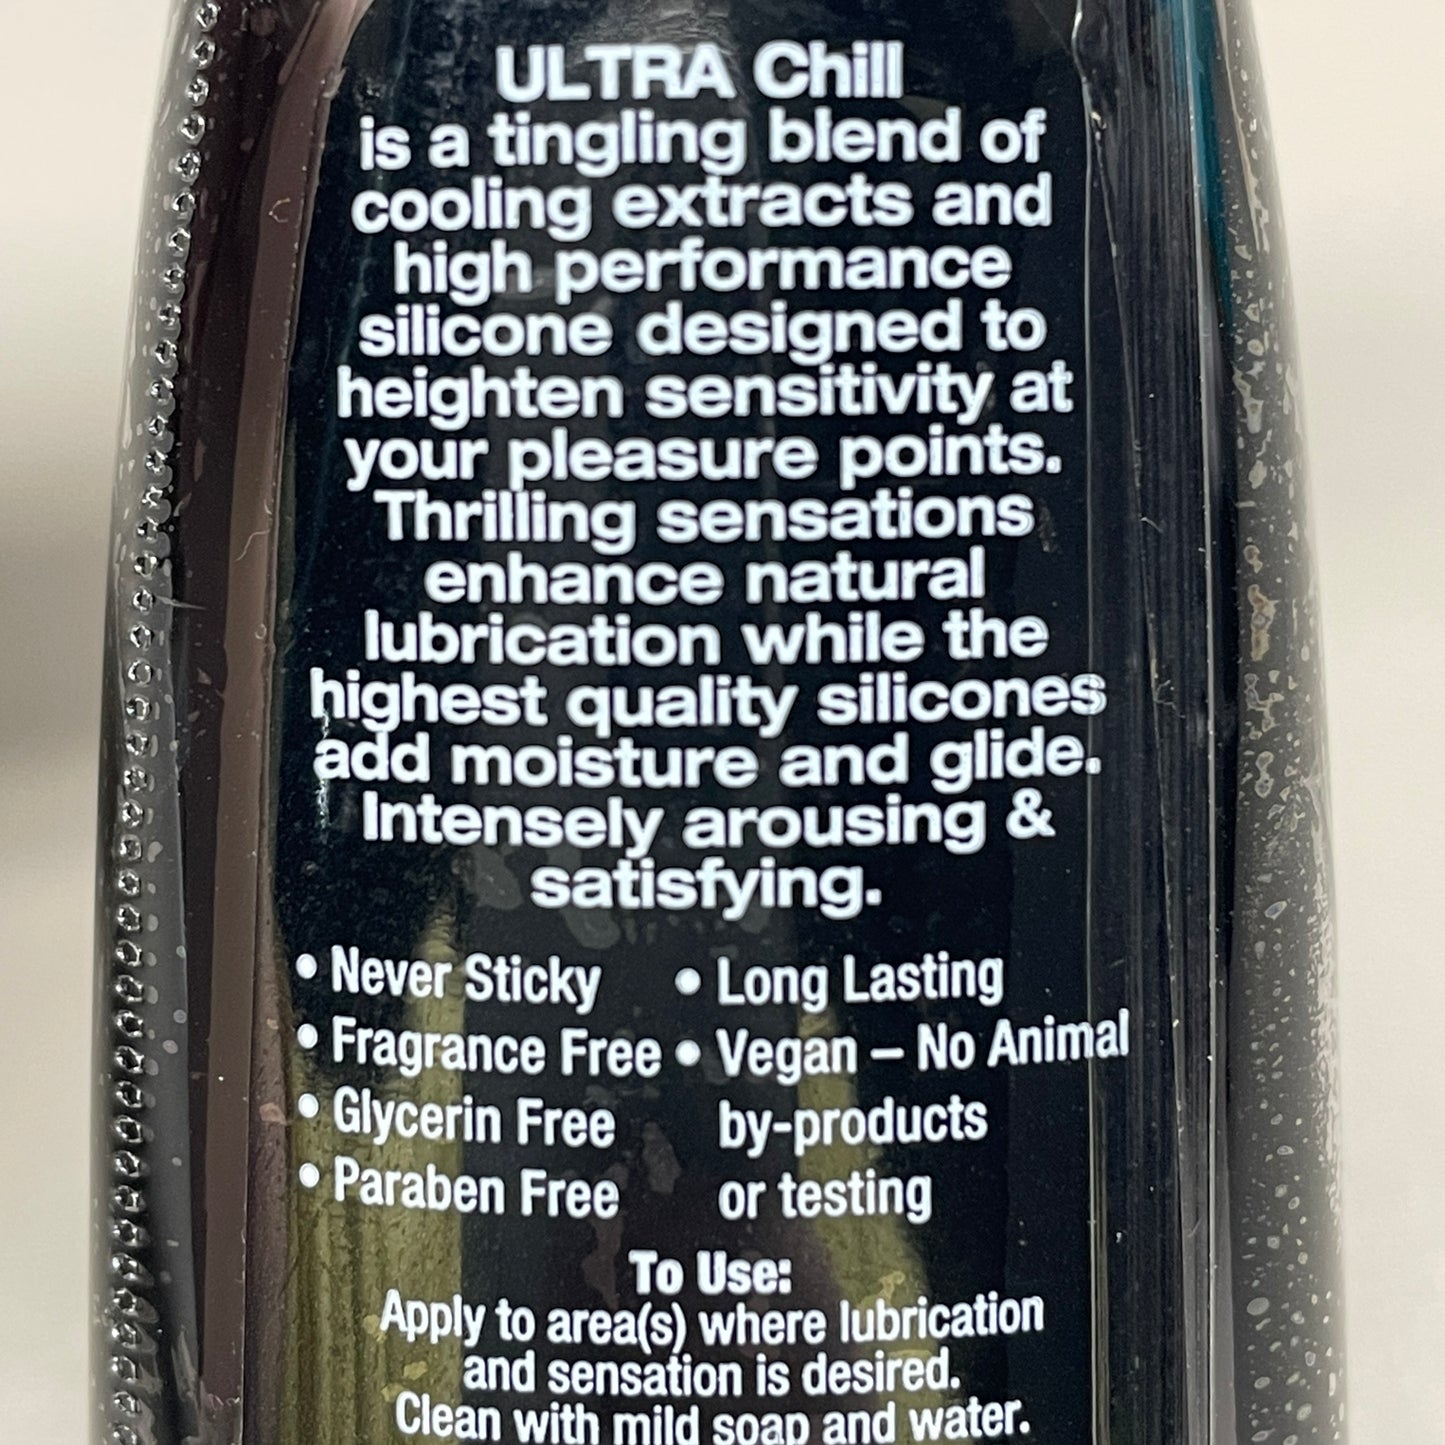 WICKED SENSUAL CARE Ultra Chill Cooling Silicone Based Intimate Lubricant 2 oz 05/24 (New)